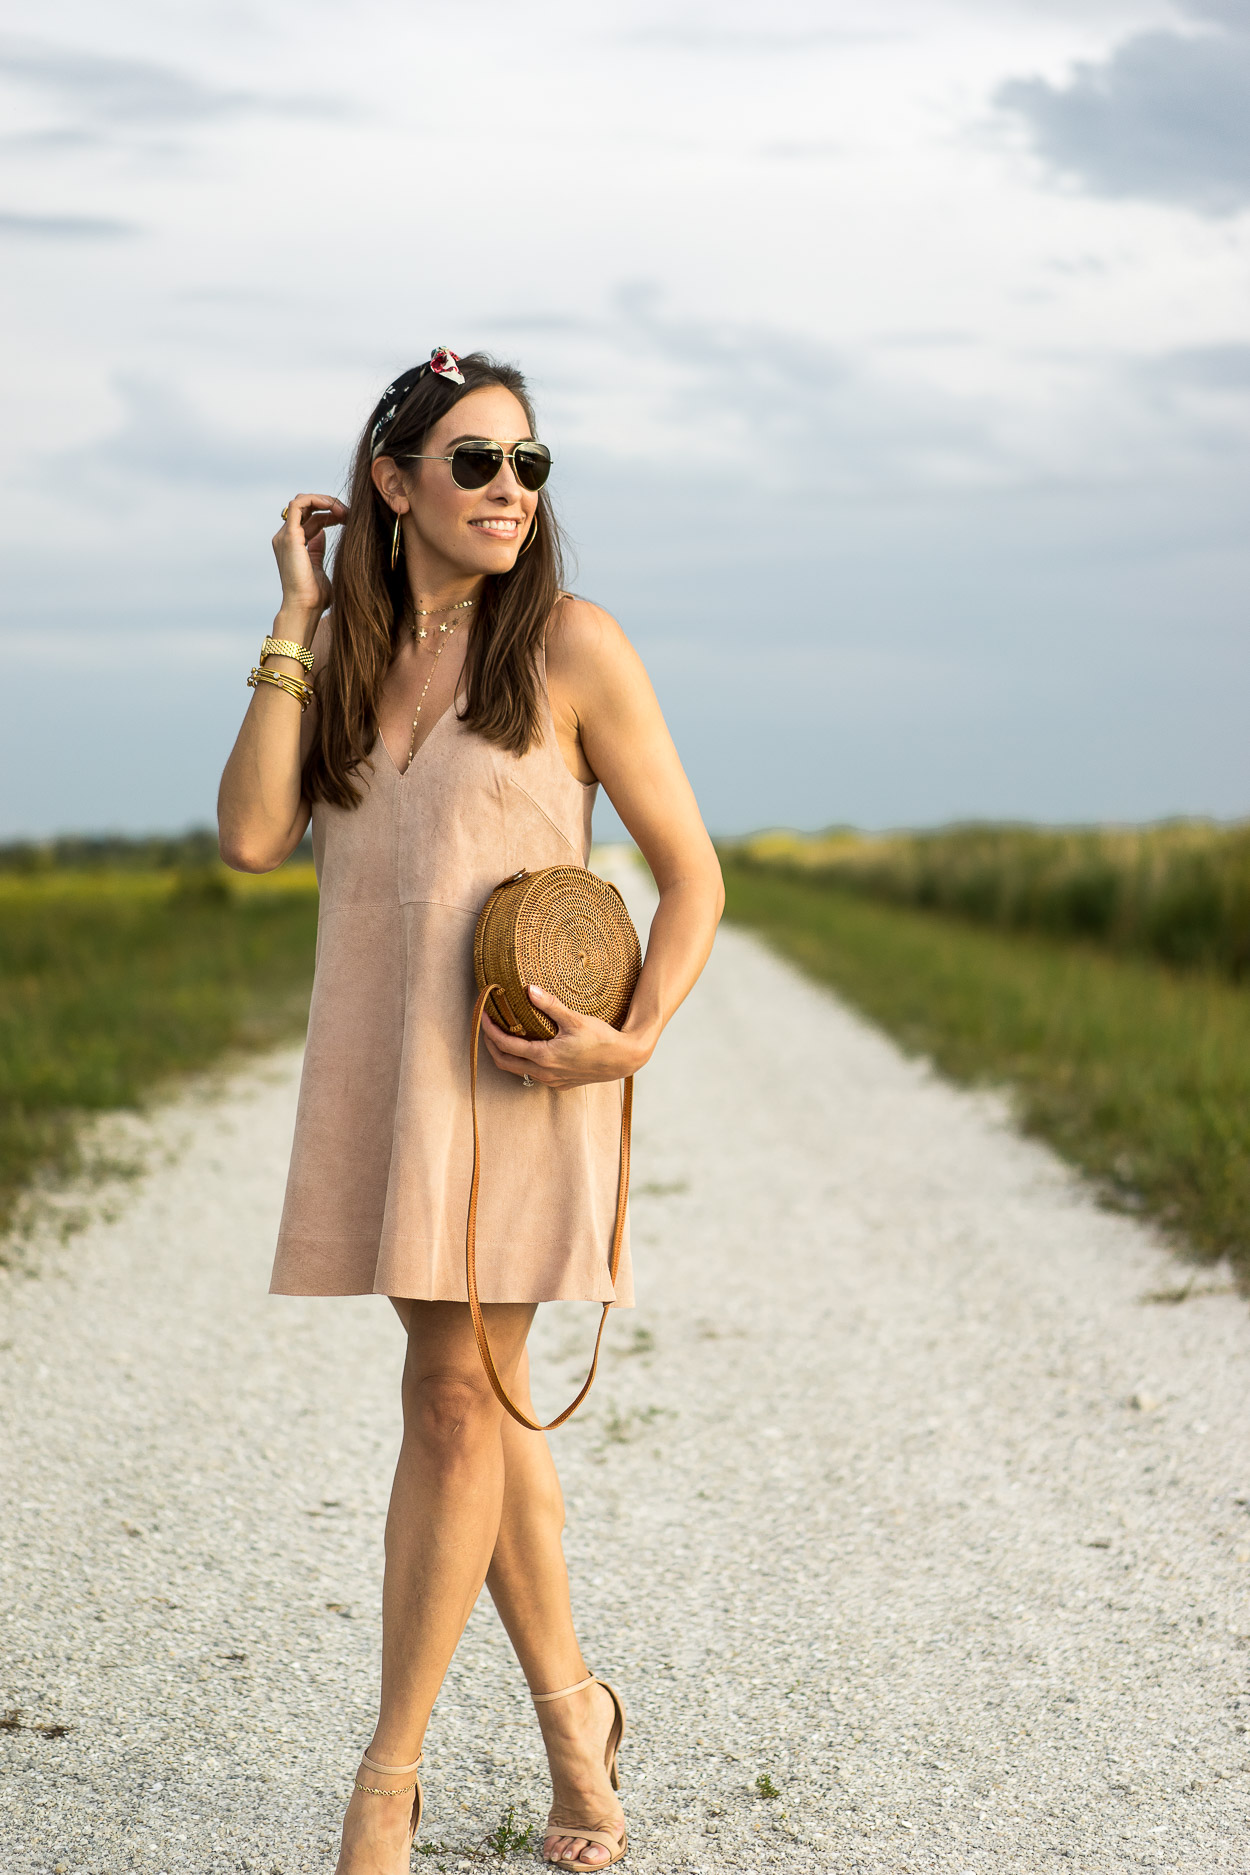 Blogger Amanda from AGlamLifestyle shows how to wear a suede dress in Summer with round basket bag and floral bandana